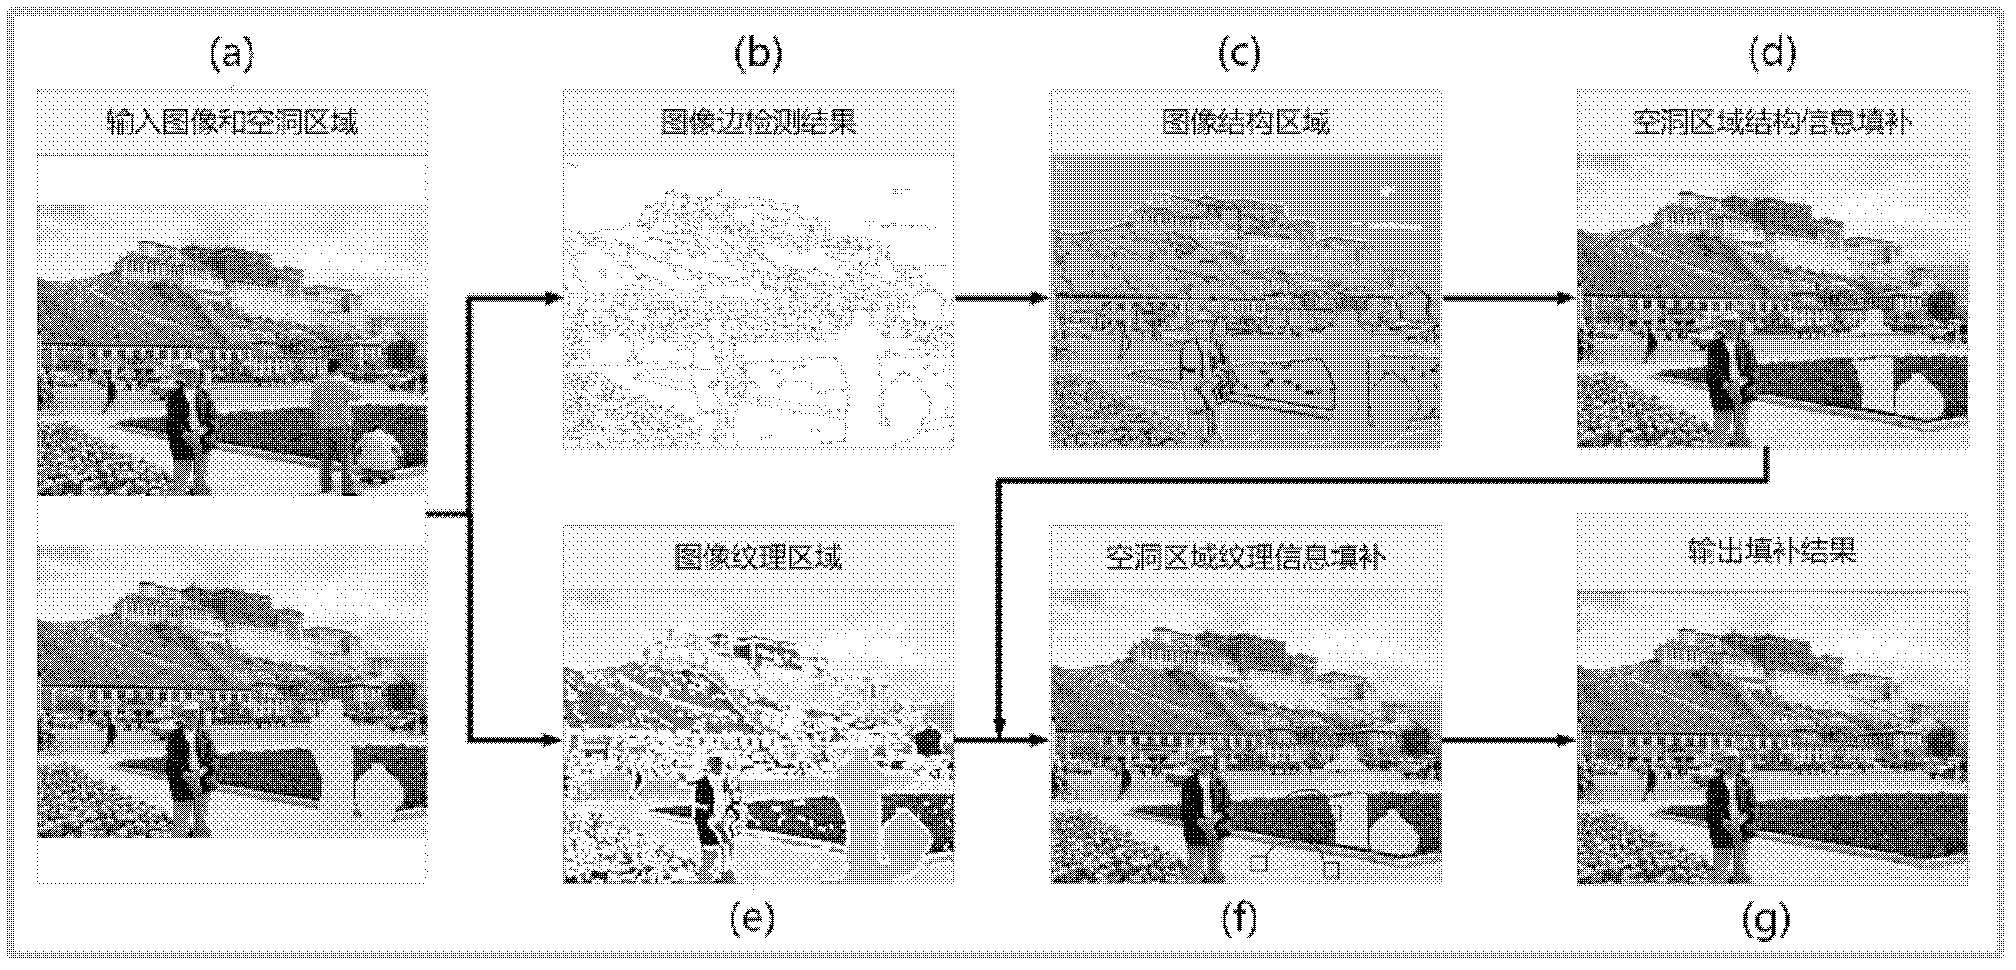 Method for automatically filling structure information and texture information of hole area of image scene